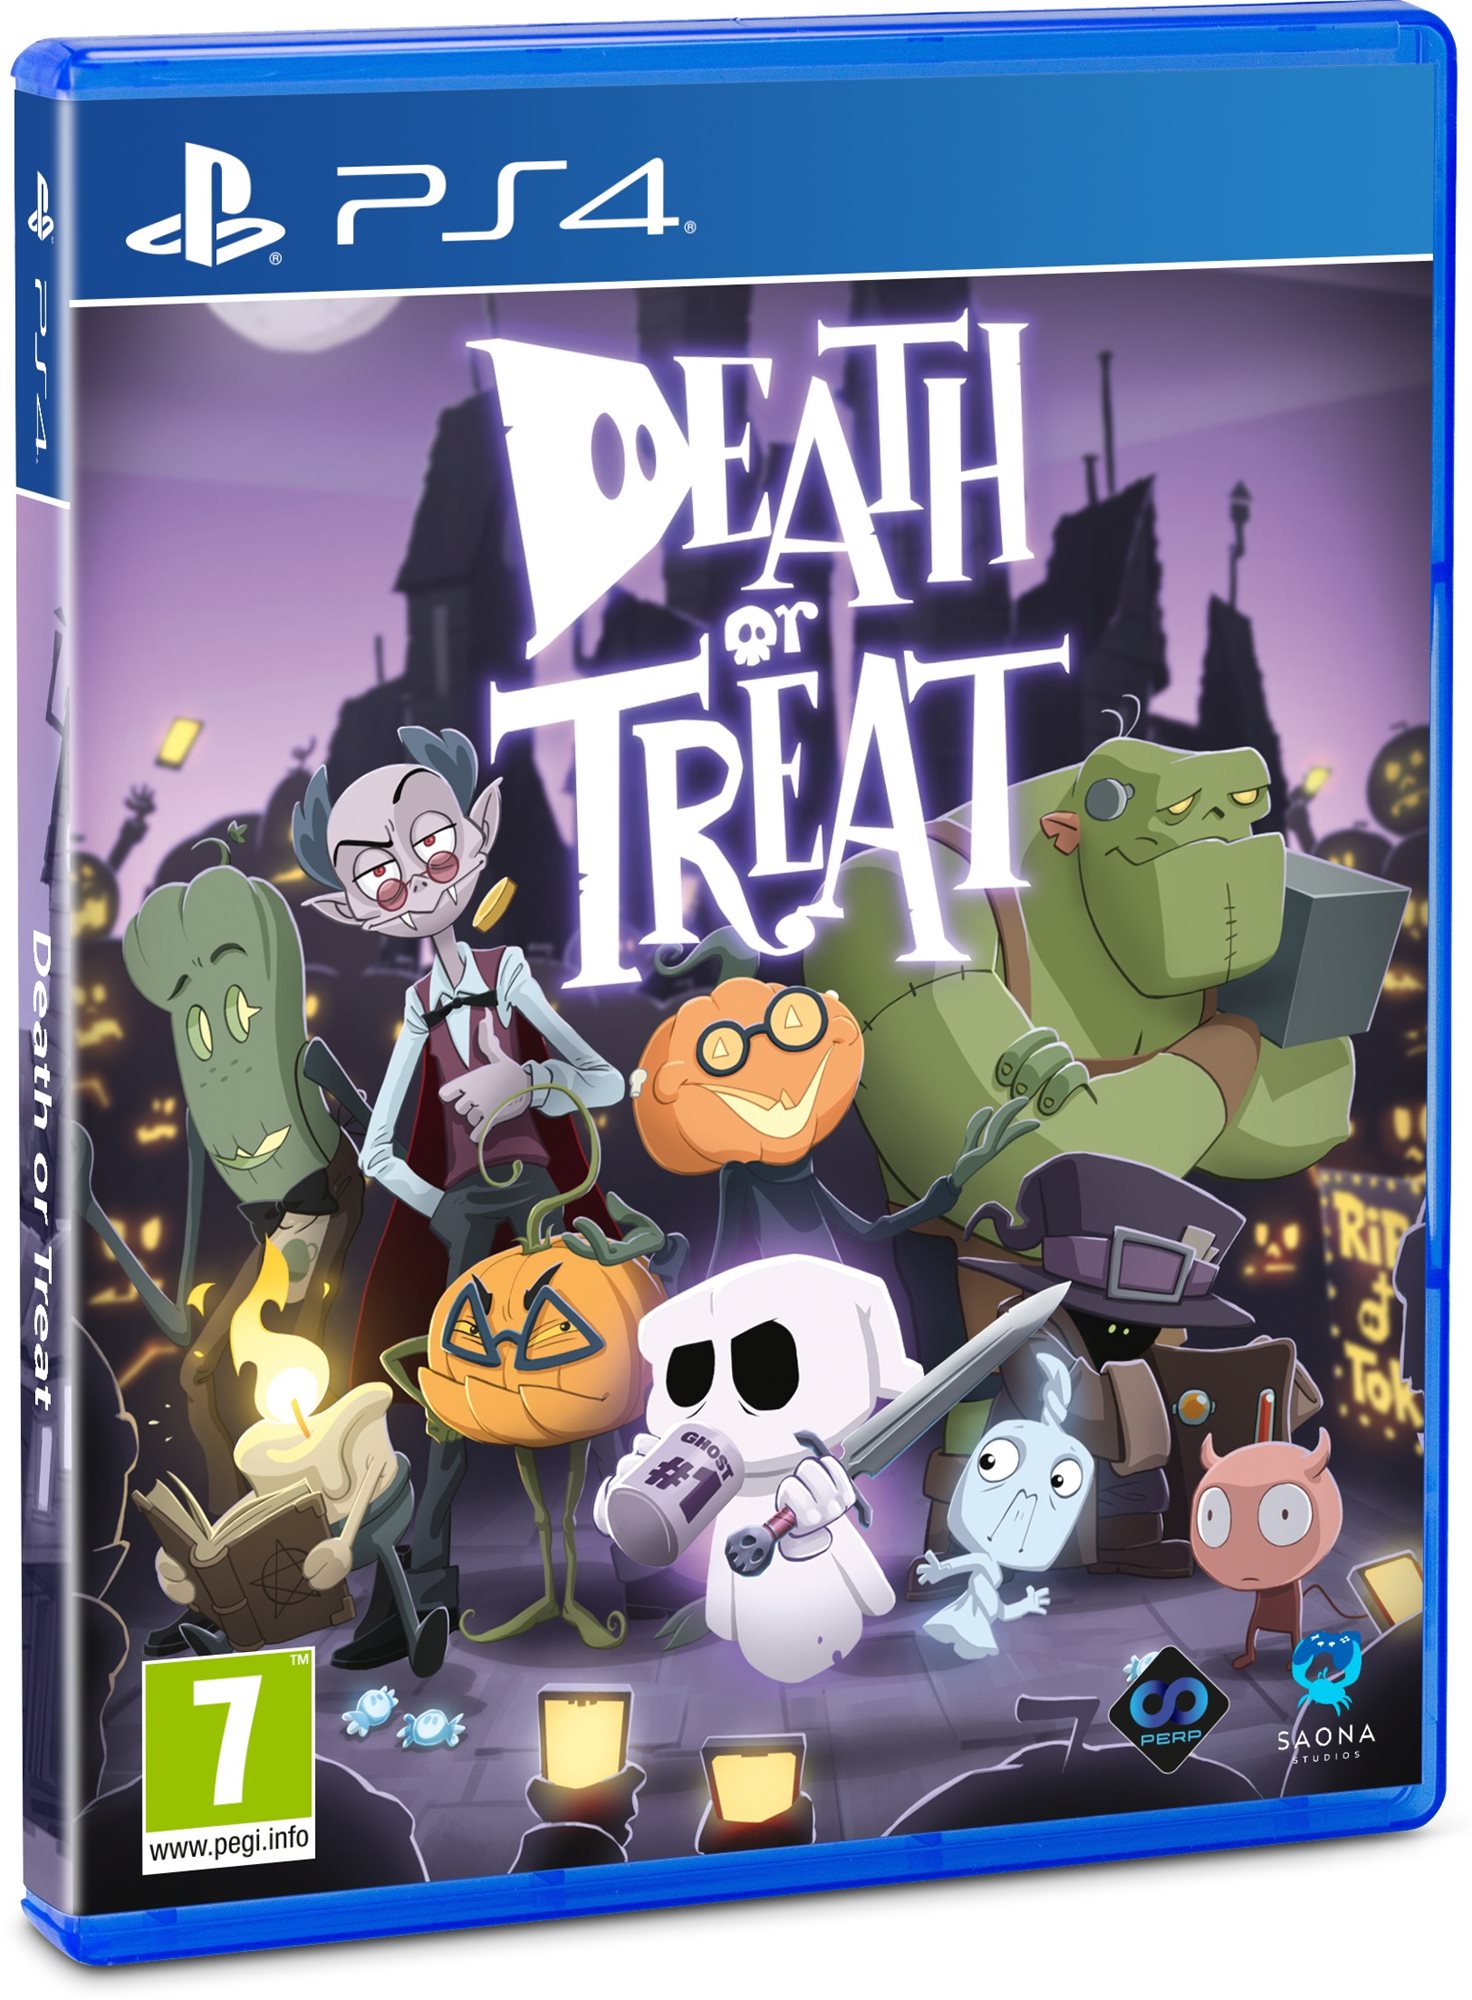 Death or Treat - PS4